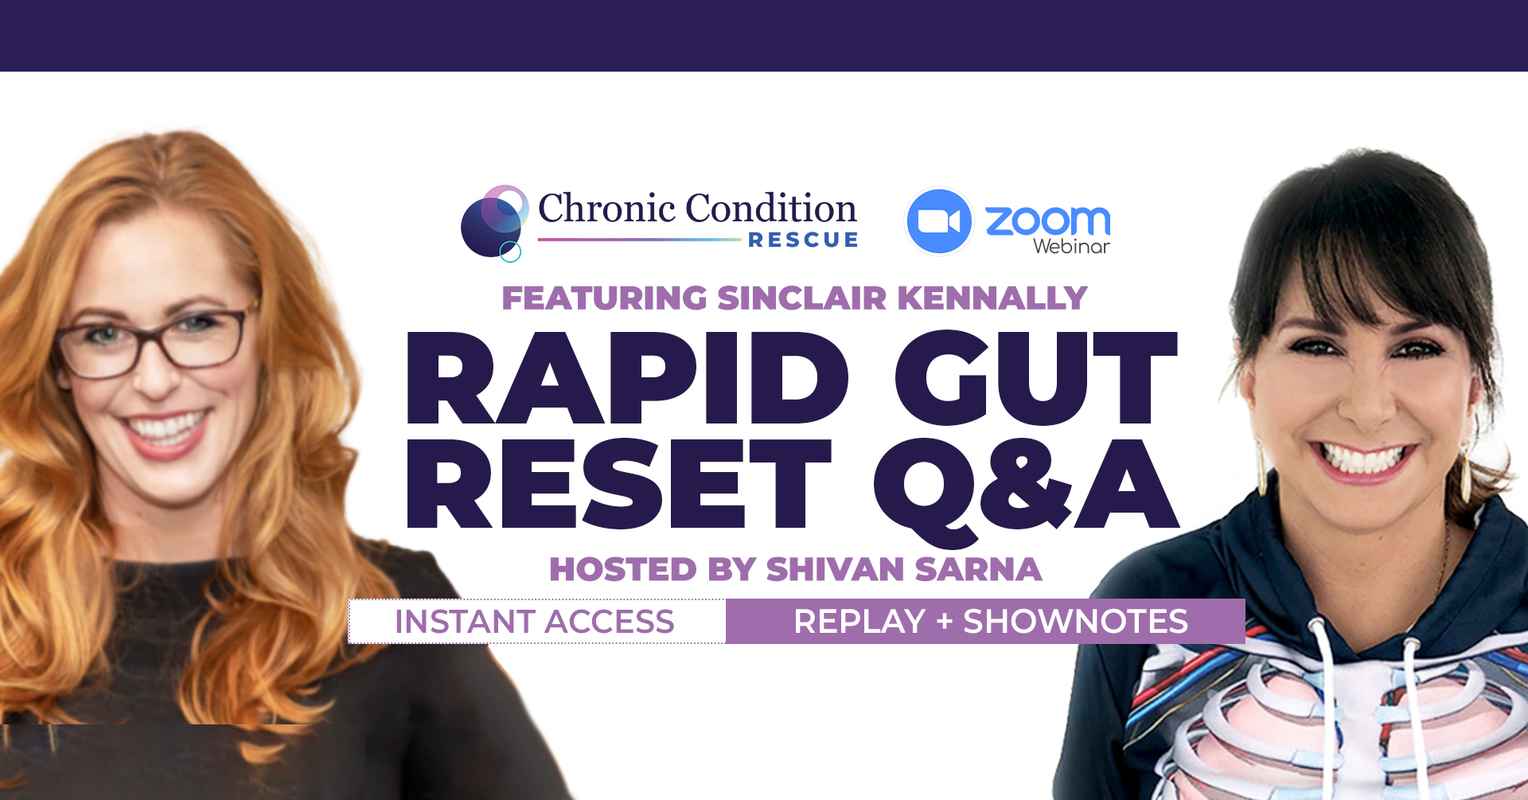 Sinclair Kennally Q&A Event Cover - Instant Access